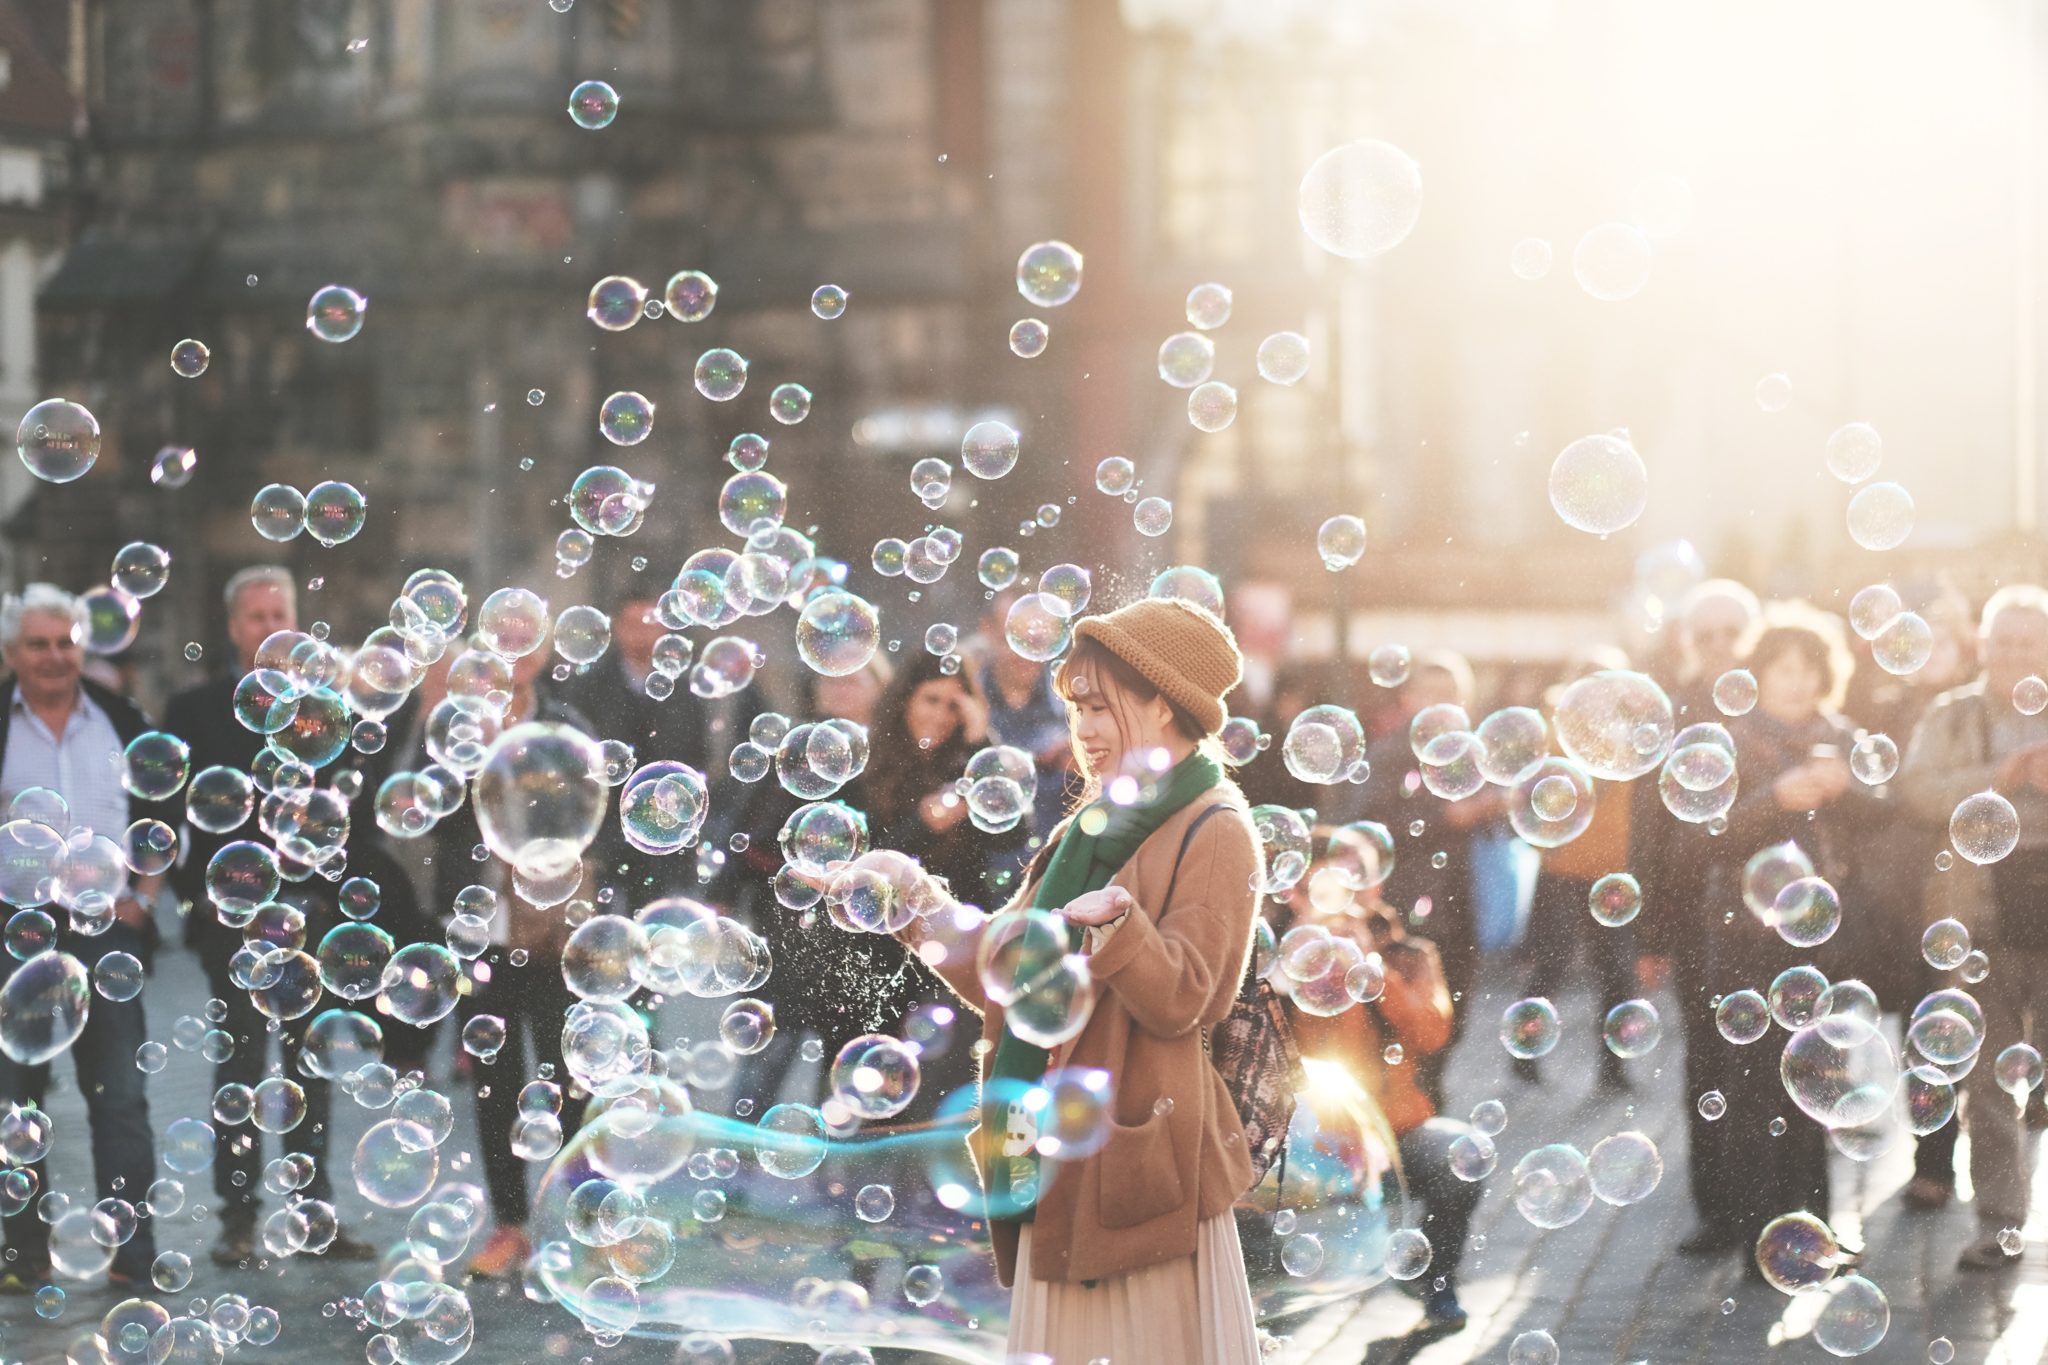 Woman in crowd surrounded by bubbles